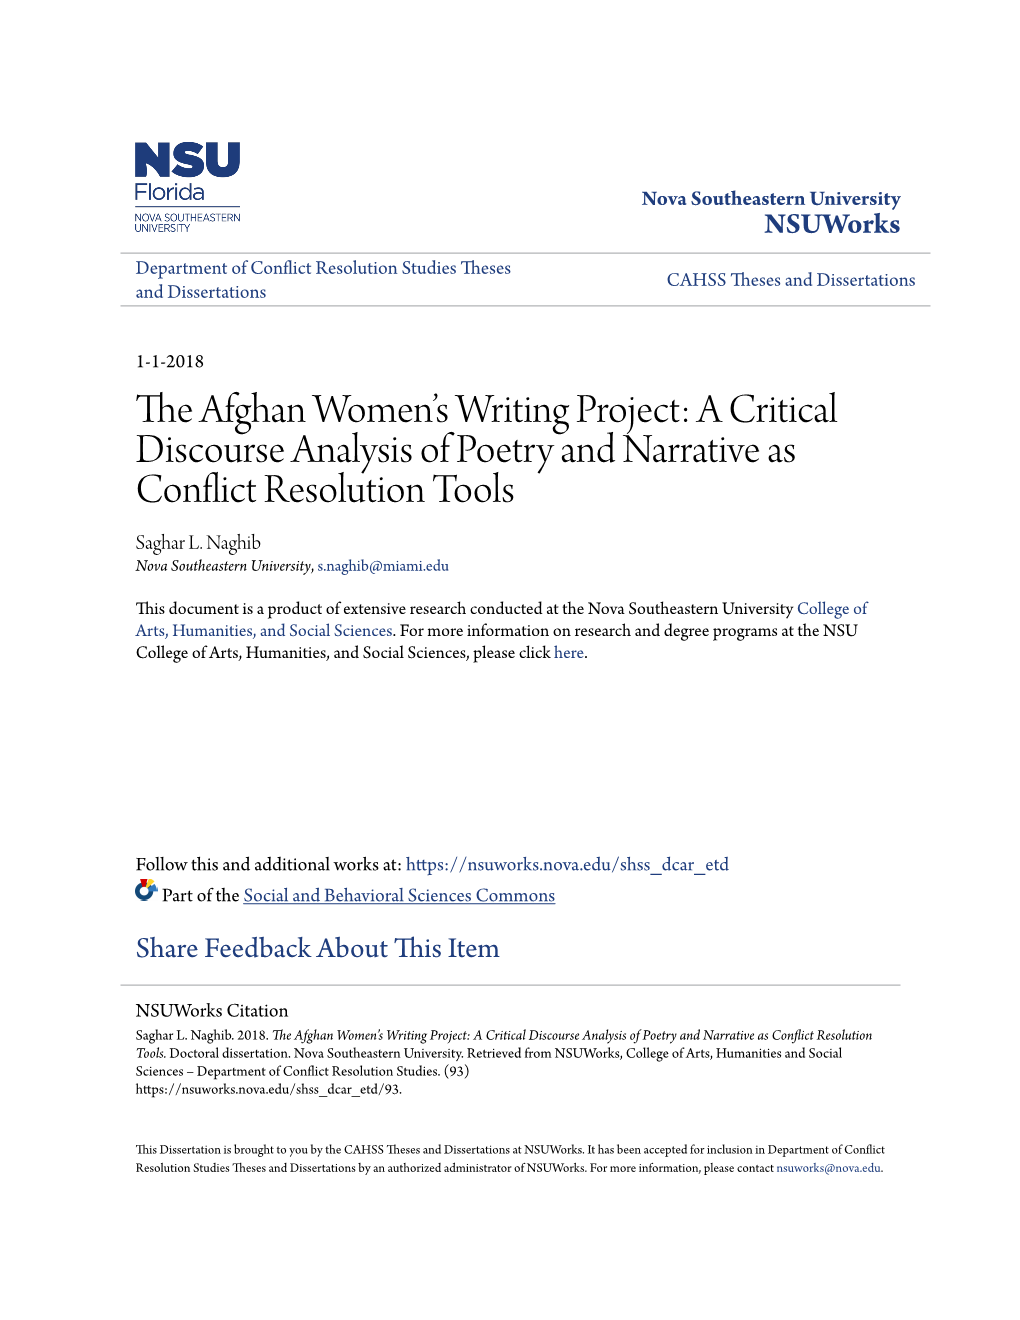 The Afghan Women's Writing Project: a Critical Discourse Analysis Of